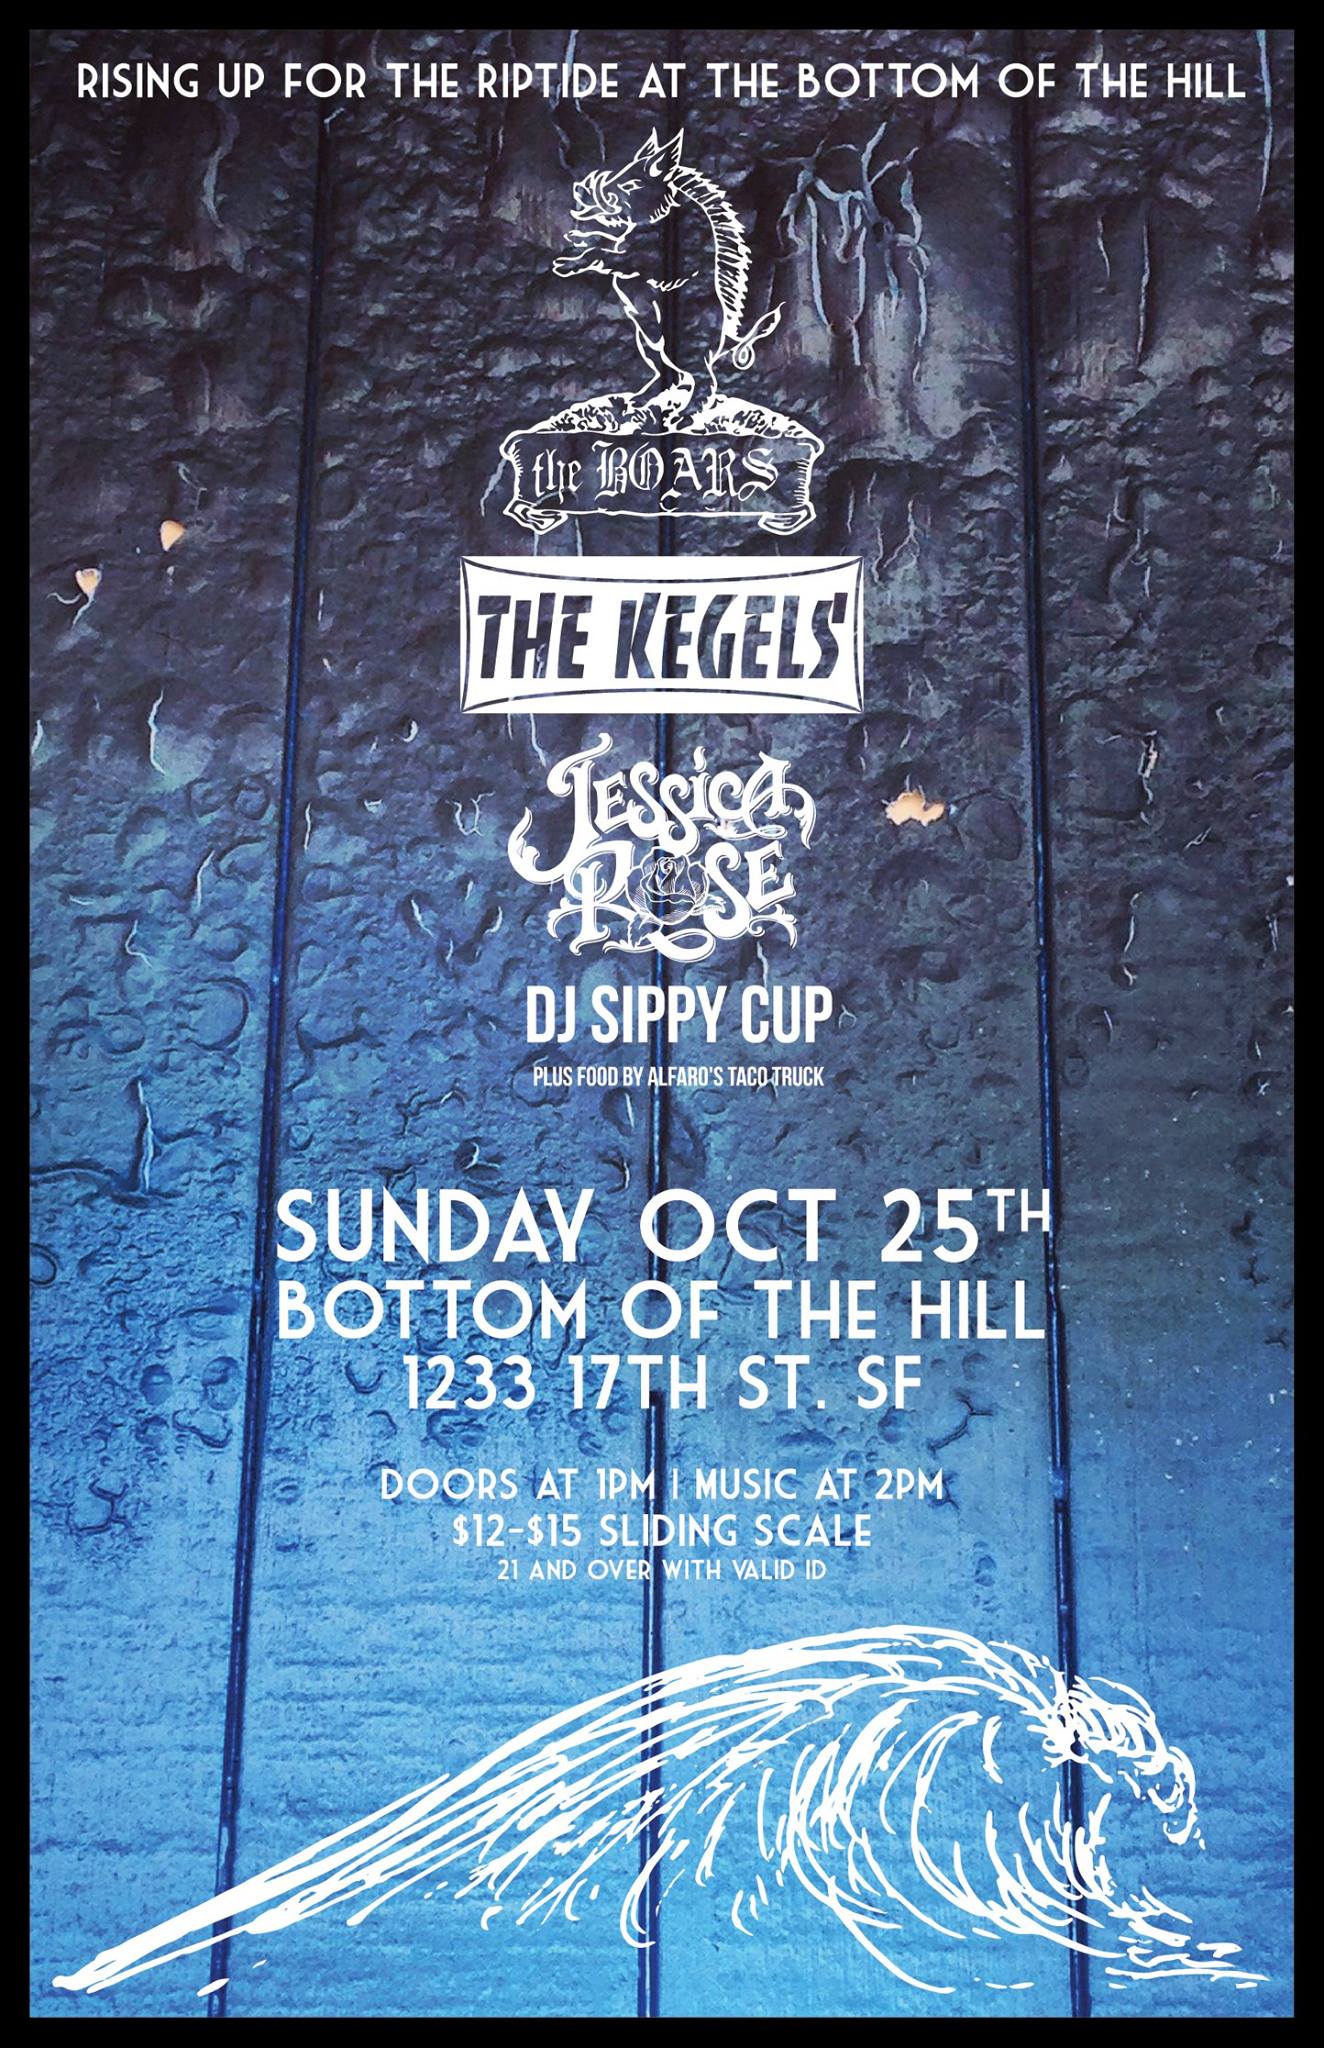 Client: Bottom of the Hill, The Riptide, San Francisco, CA. Description: Poster designed for a benefit show at Bottom of the Hill raising money for the bar, The Riptide, after suffering a terrible fire which resulted in closing down for a year. Proceeds went to helping out the staff who had lost their jobs.